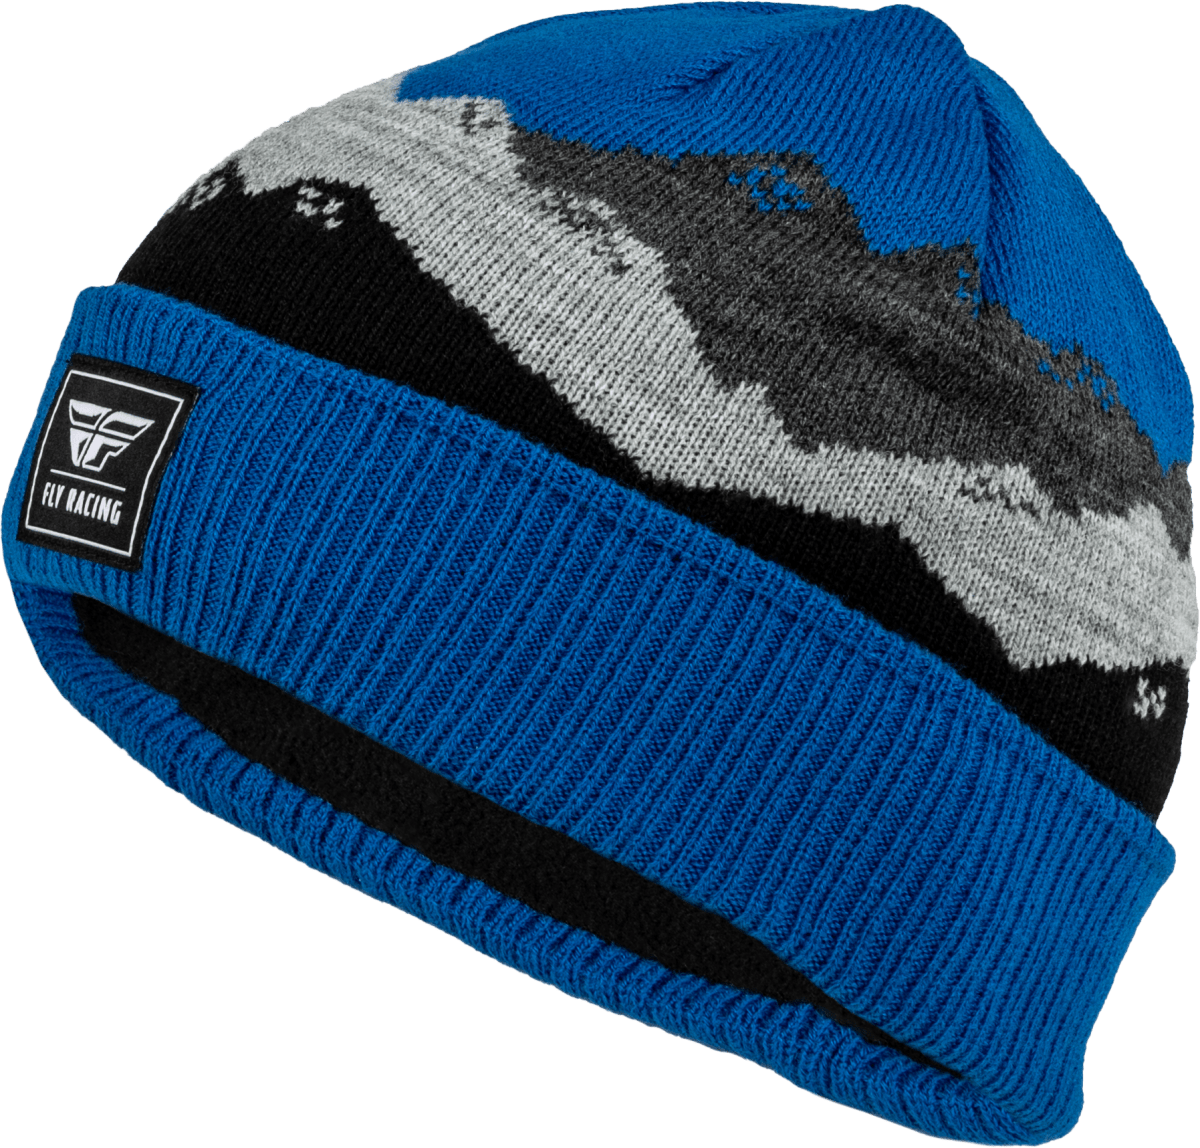 FLY RACING - YOUTH SNOW BEANIE - 351-0996 - 191361413193